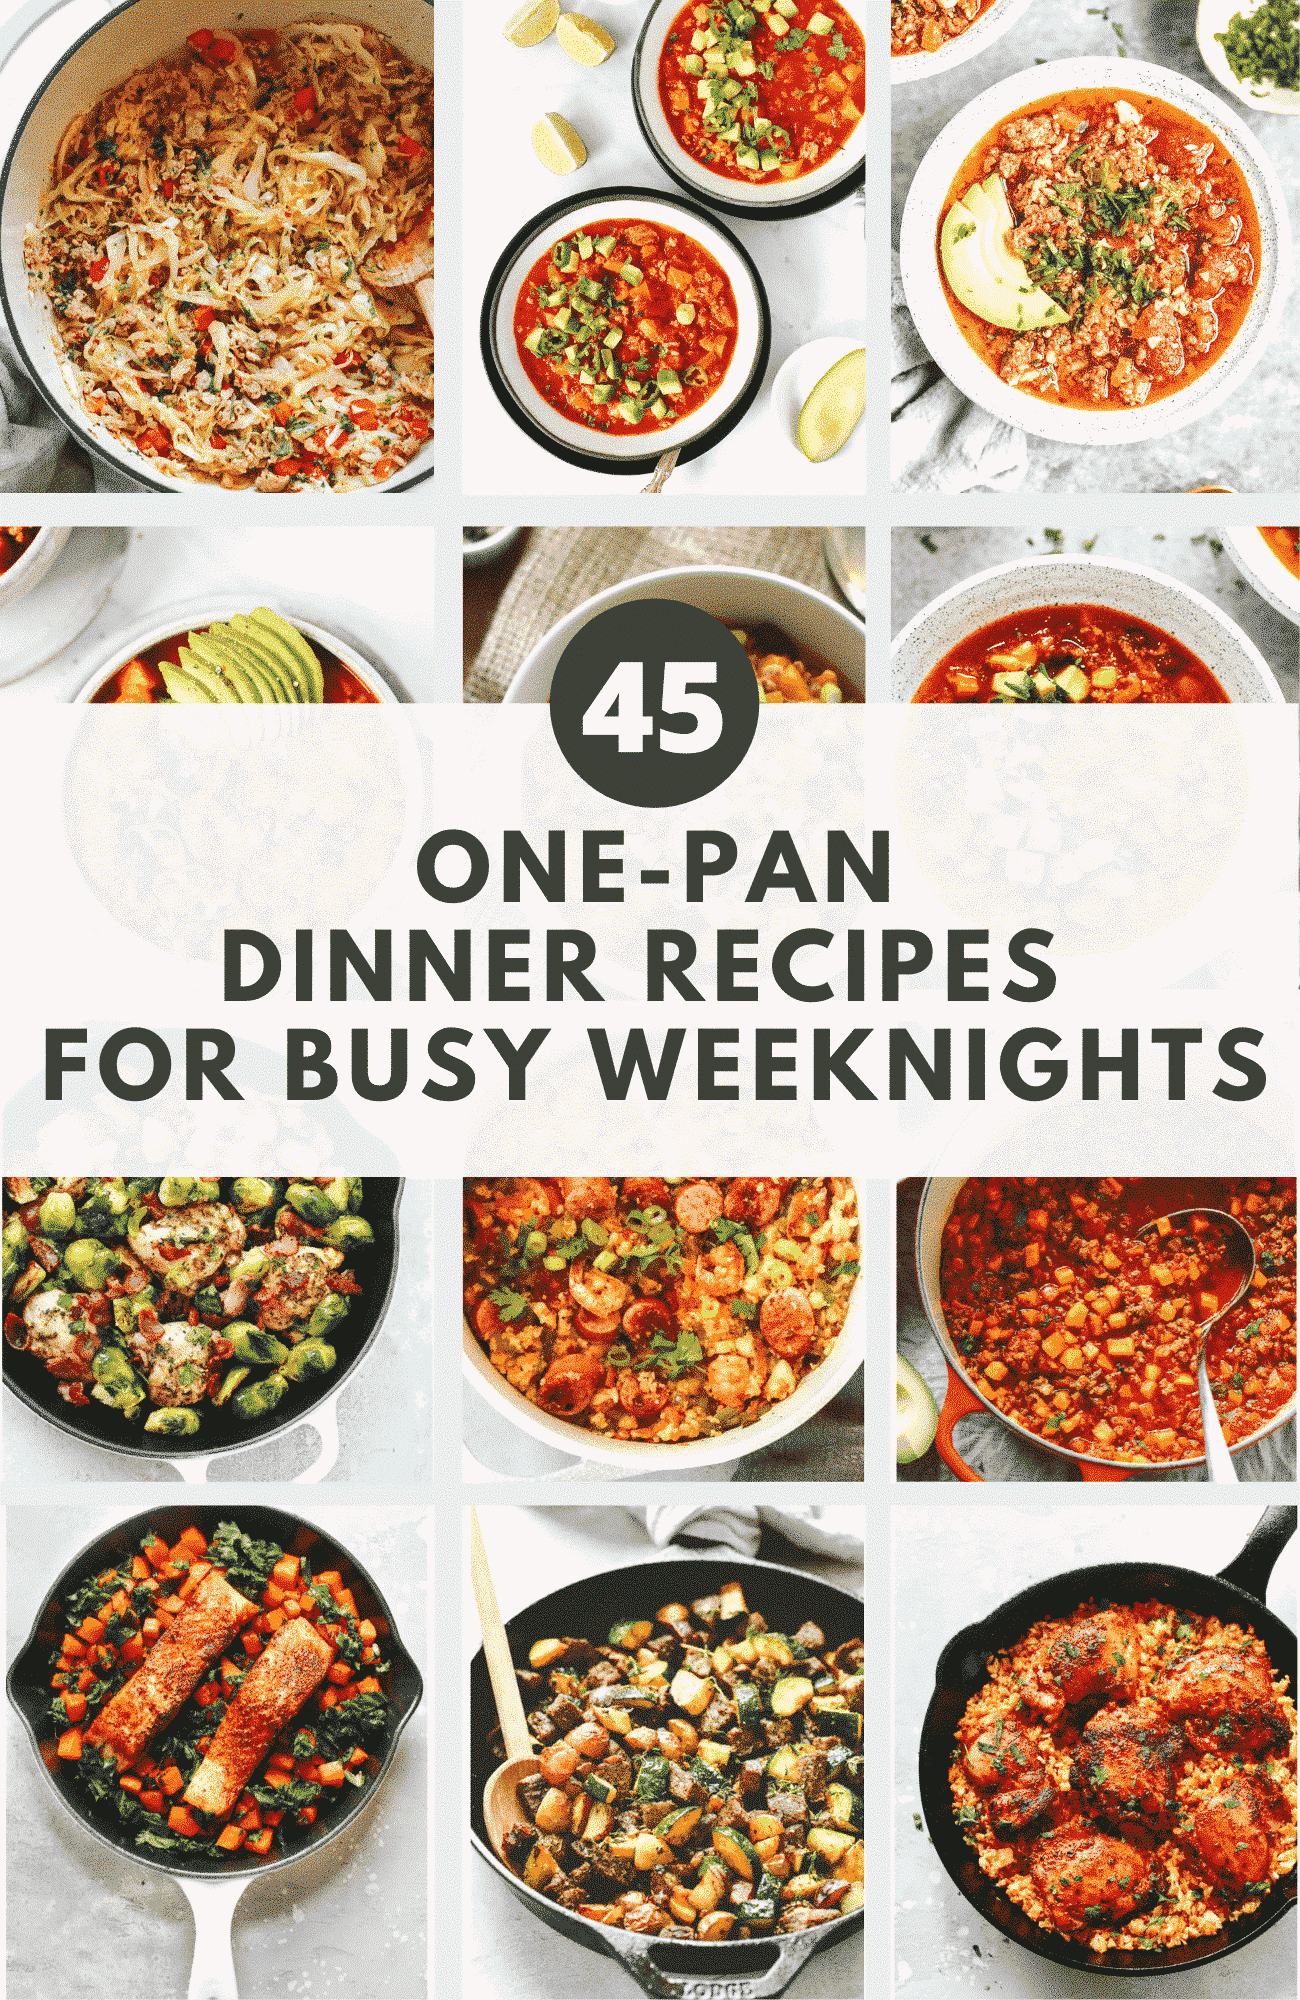 Round up image with the text "45 One-Pan Dinner Recipes for Busy Weeknights."